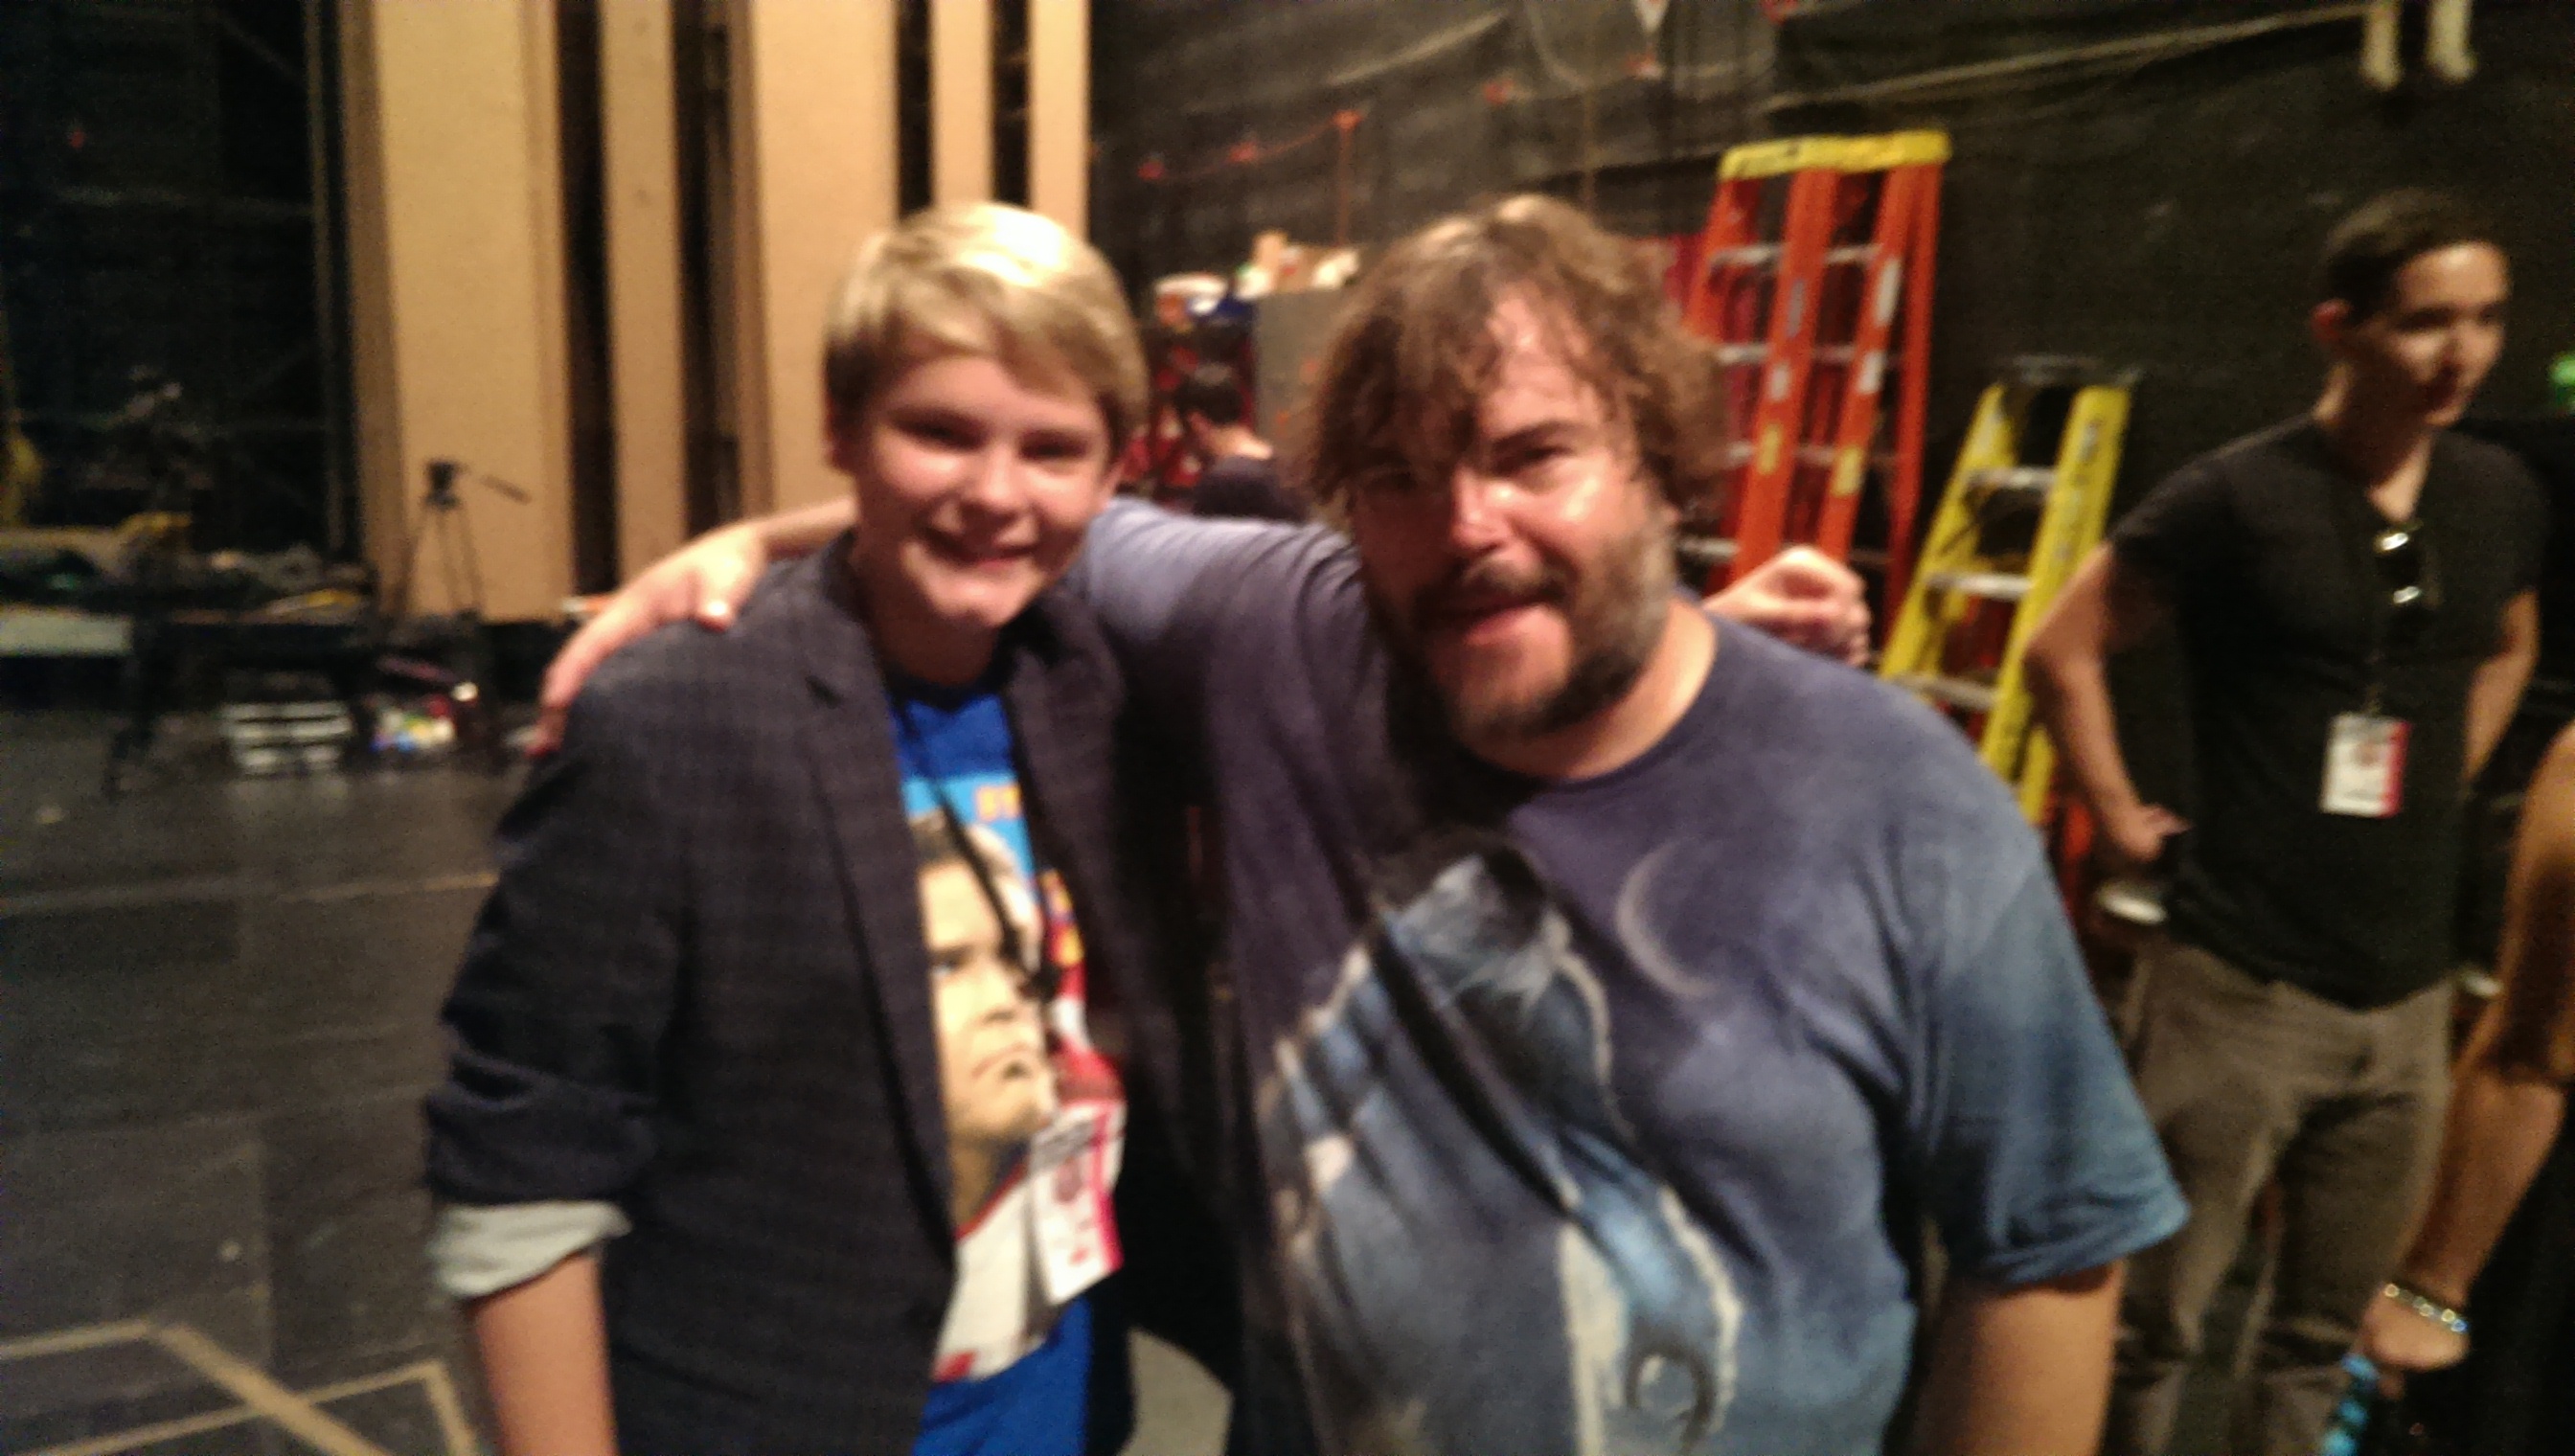 Reese Hartwig with Jack Black backstage at the Cancer For College Comedy Explosion